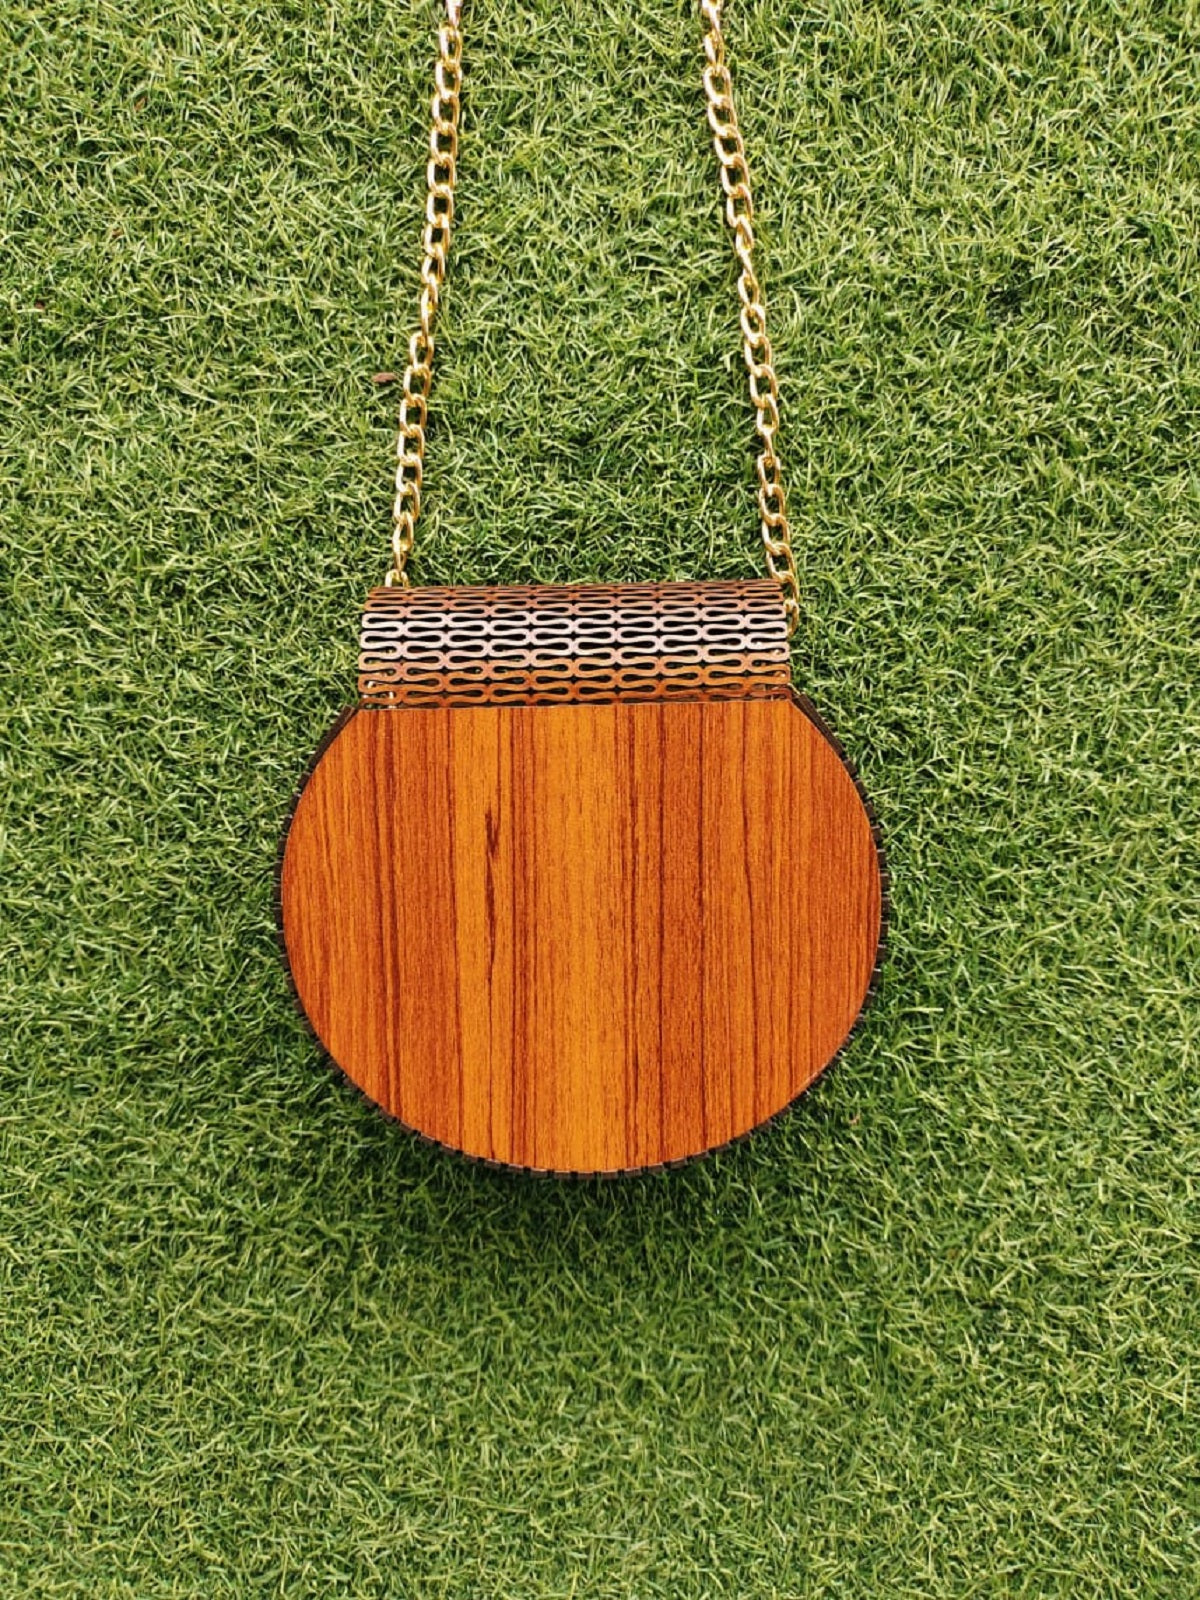 Handcrafted wooden handbag with a distinctive curve, embodying both natural grace and artisanal expertise